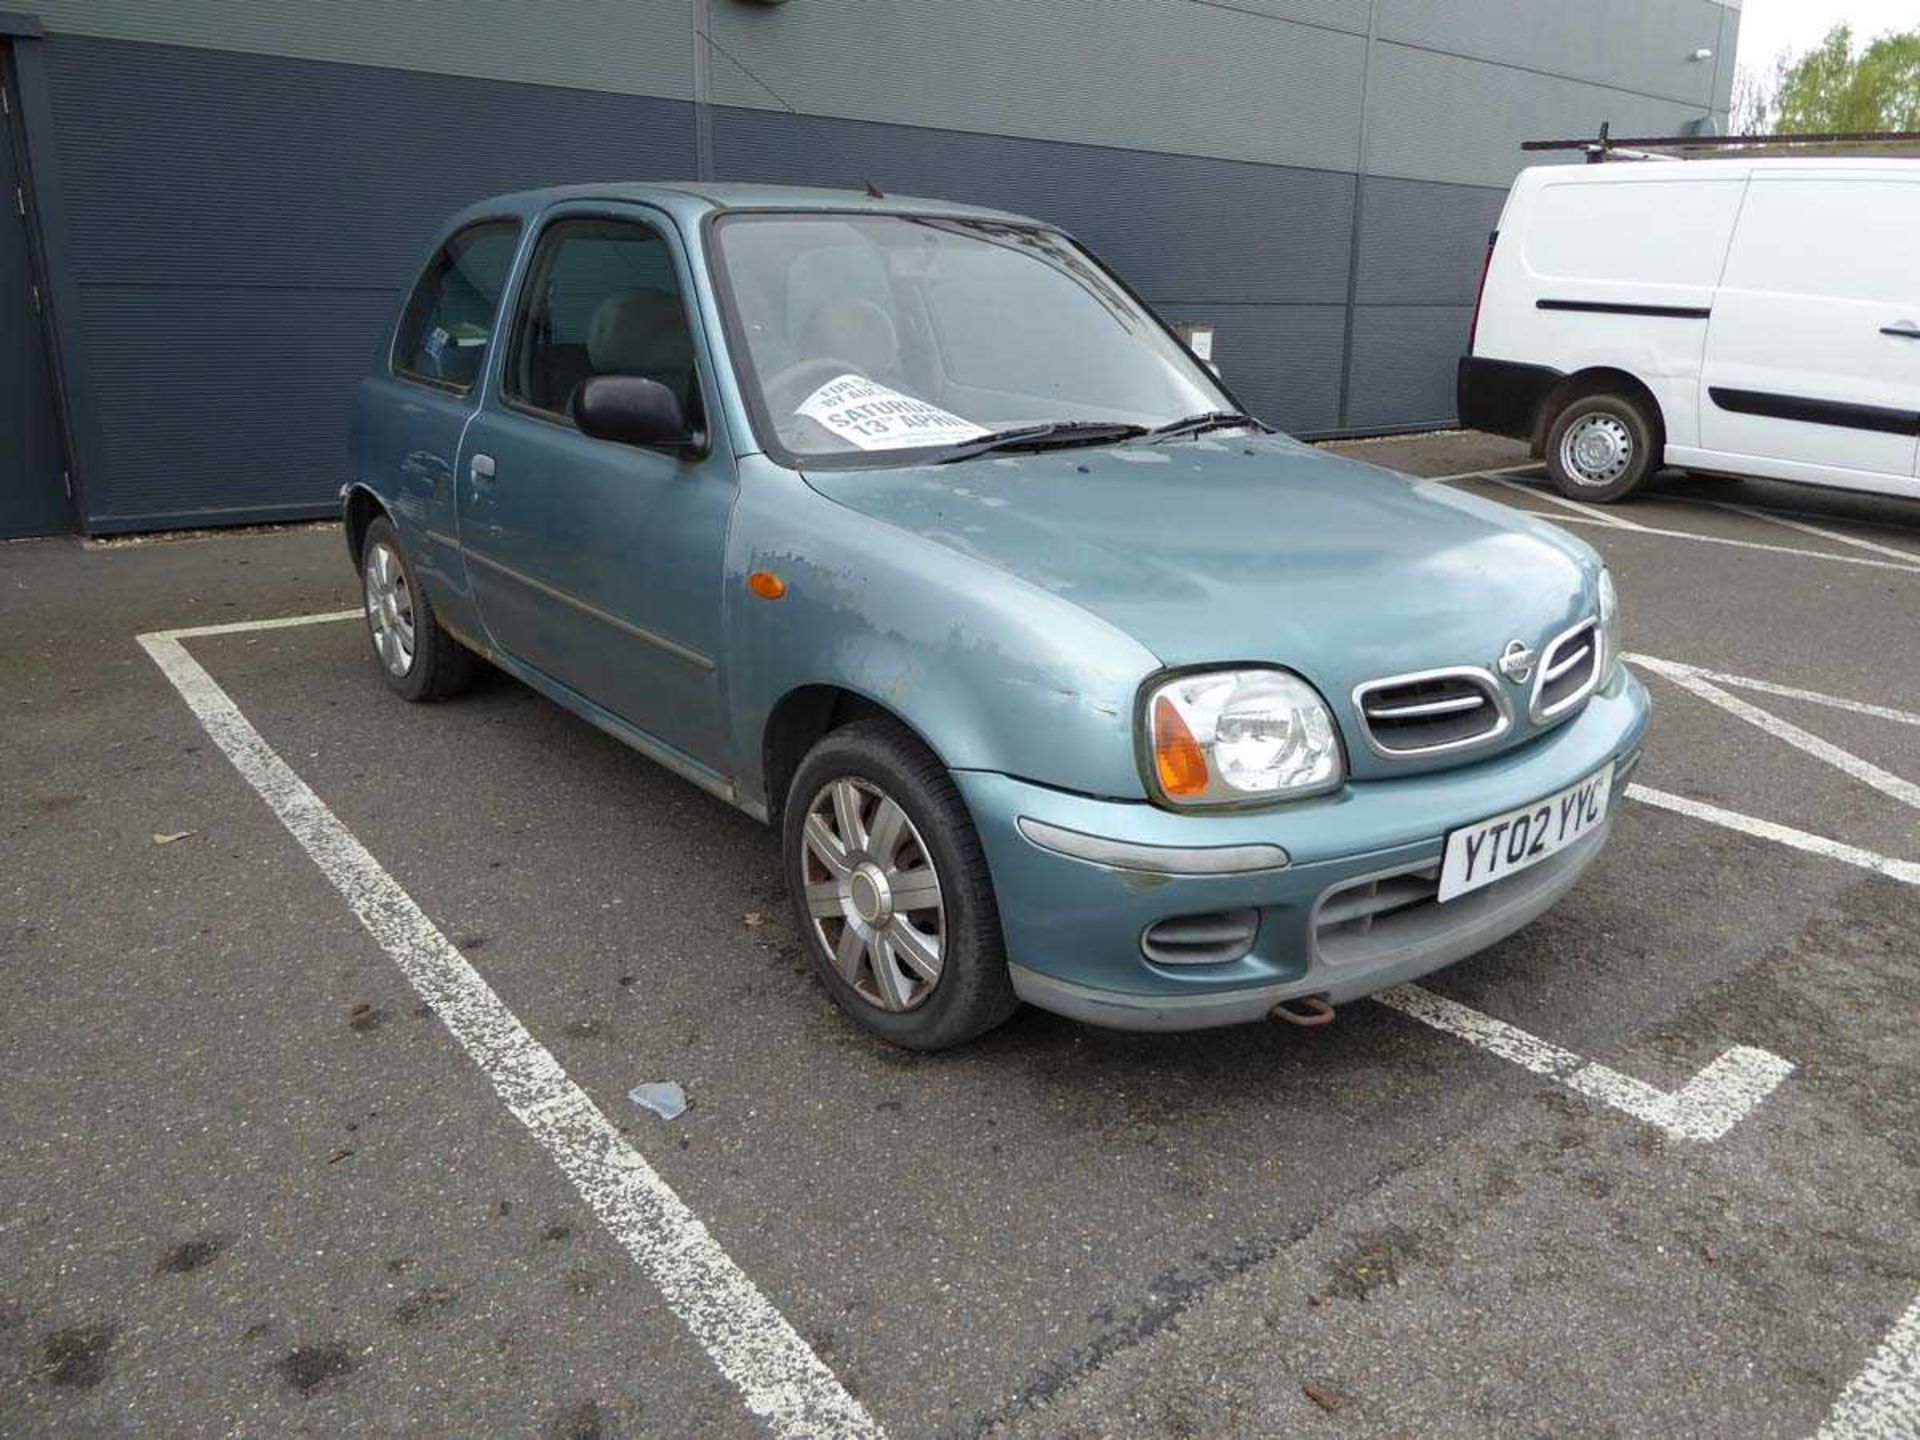 (YT02 YYC) Nissan Micra S Auto, 3-door hatchback in grey, first registered 27/03/2002, 998cc - Image 10 of 10